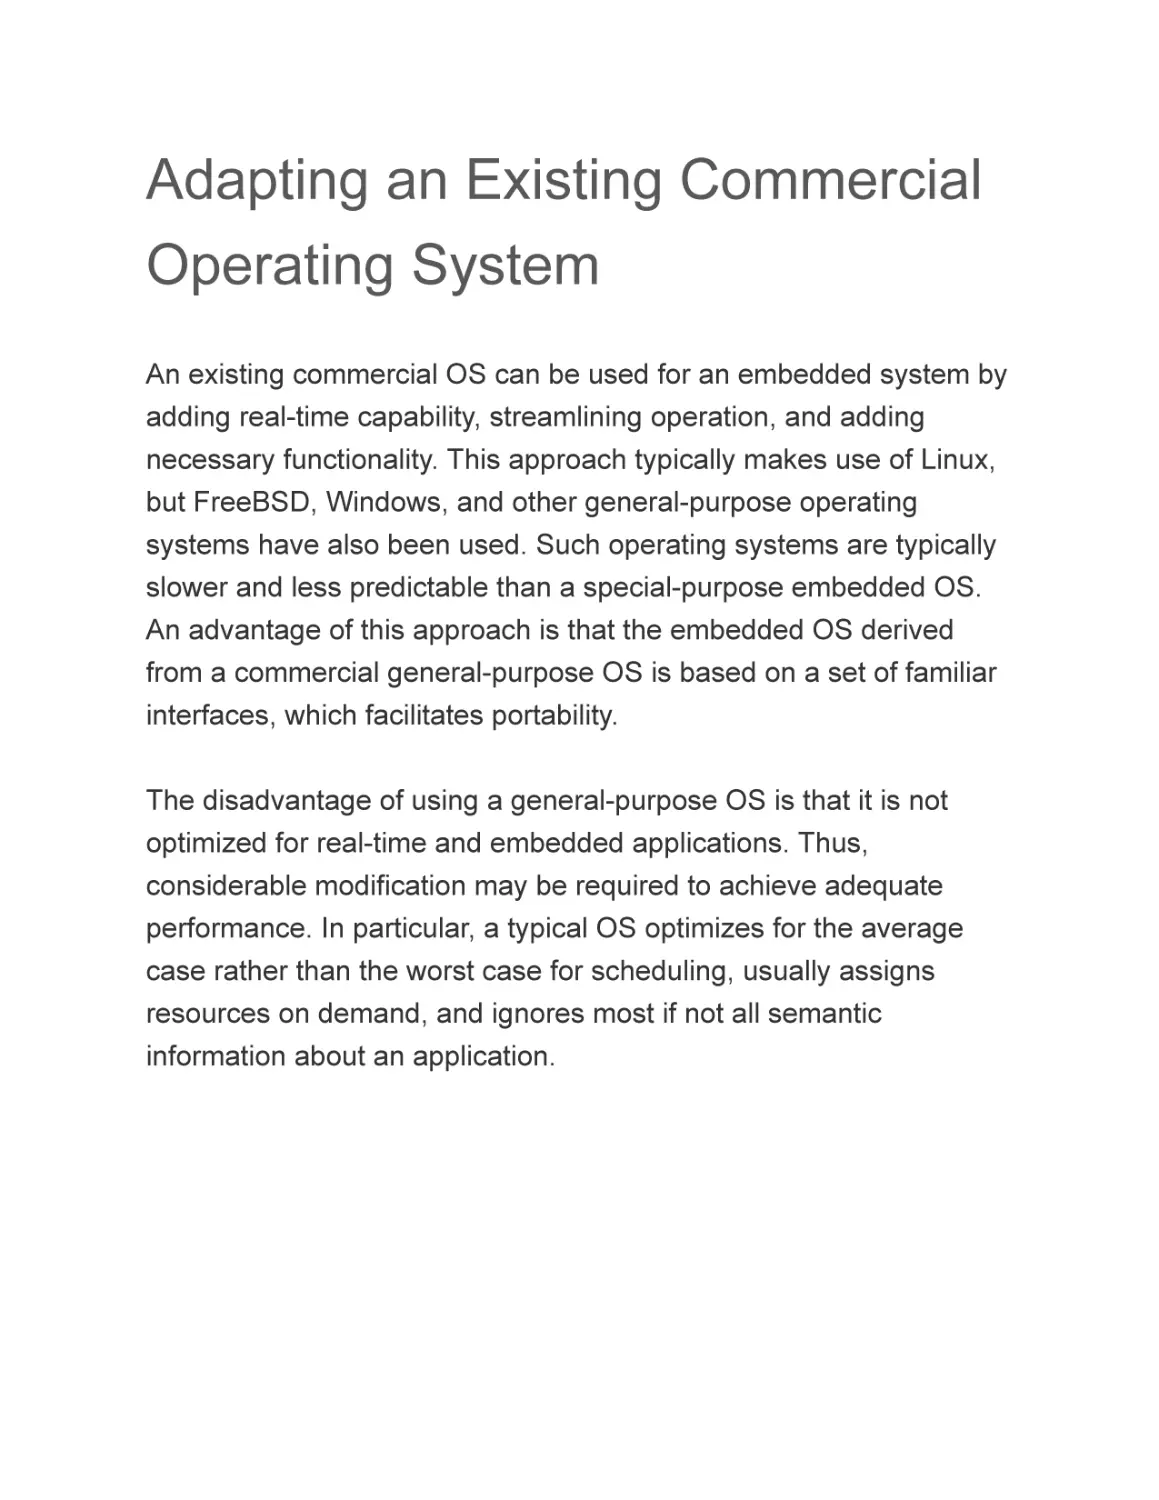 Adapting an Existing Commercial Operating System